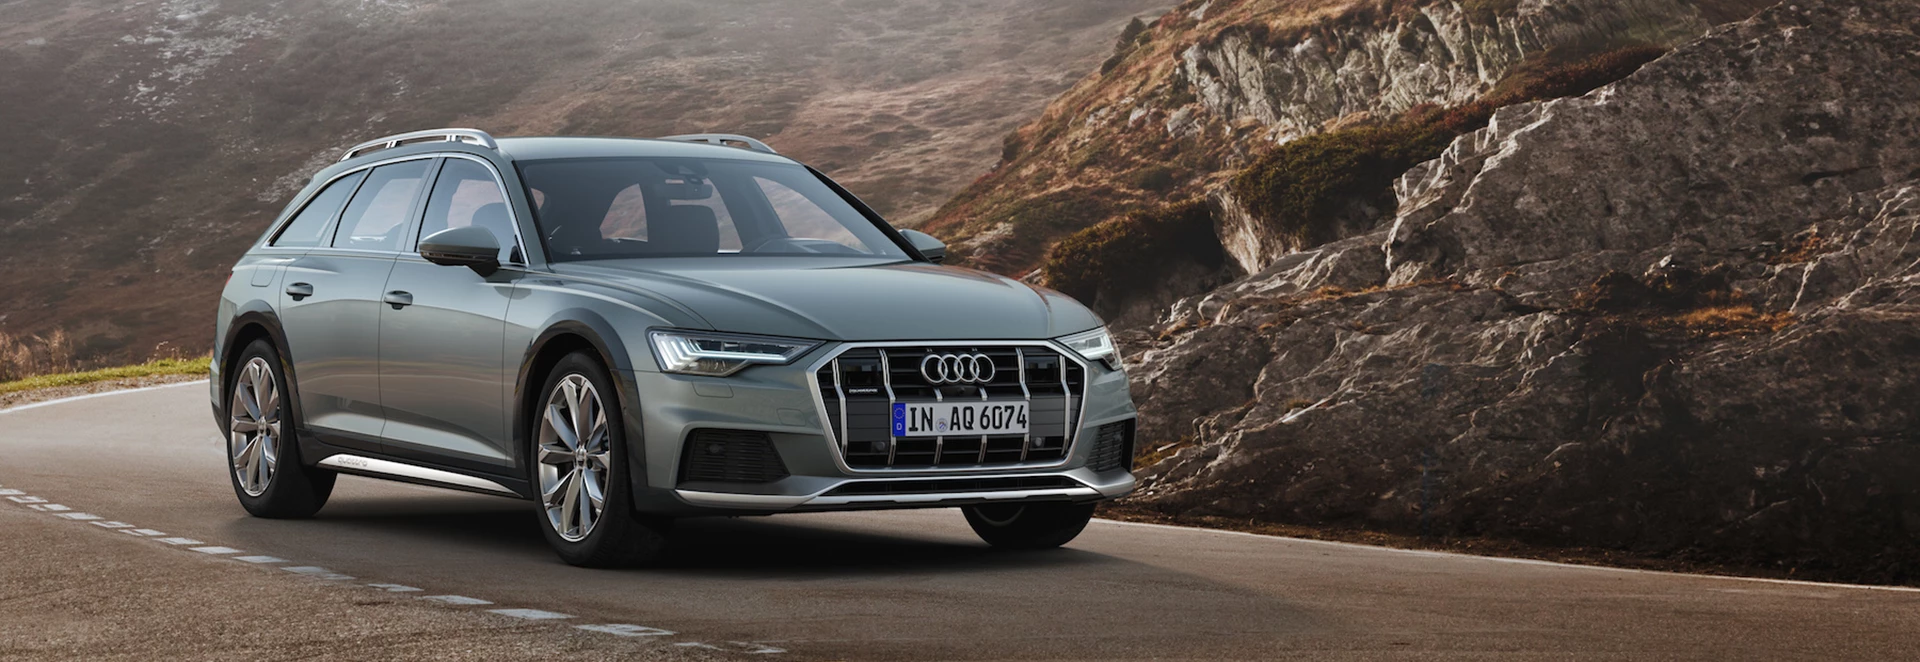 New rugged Audi A6 Allroad unveiled 